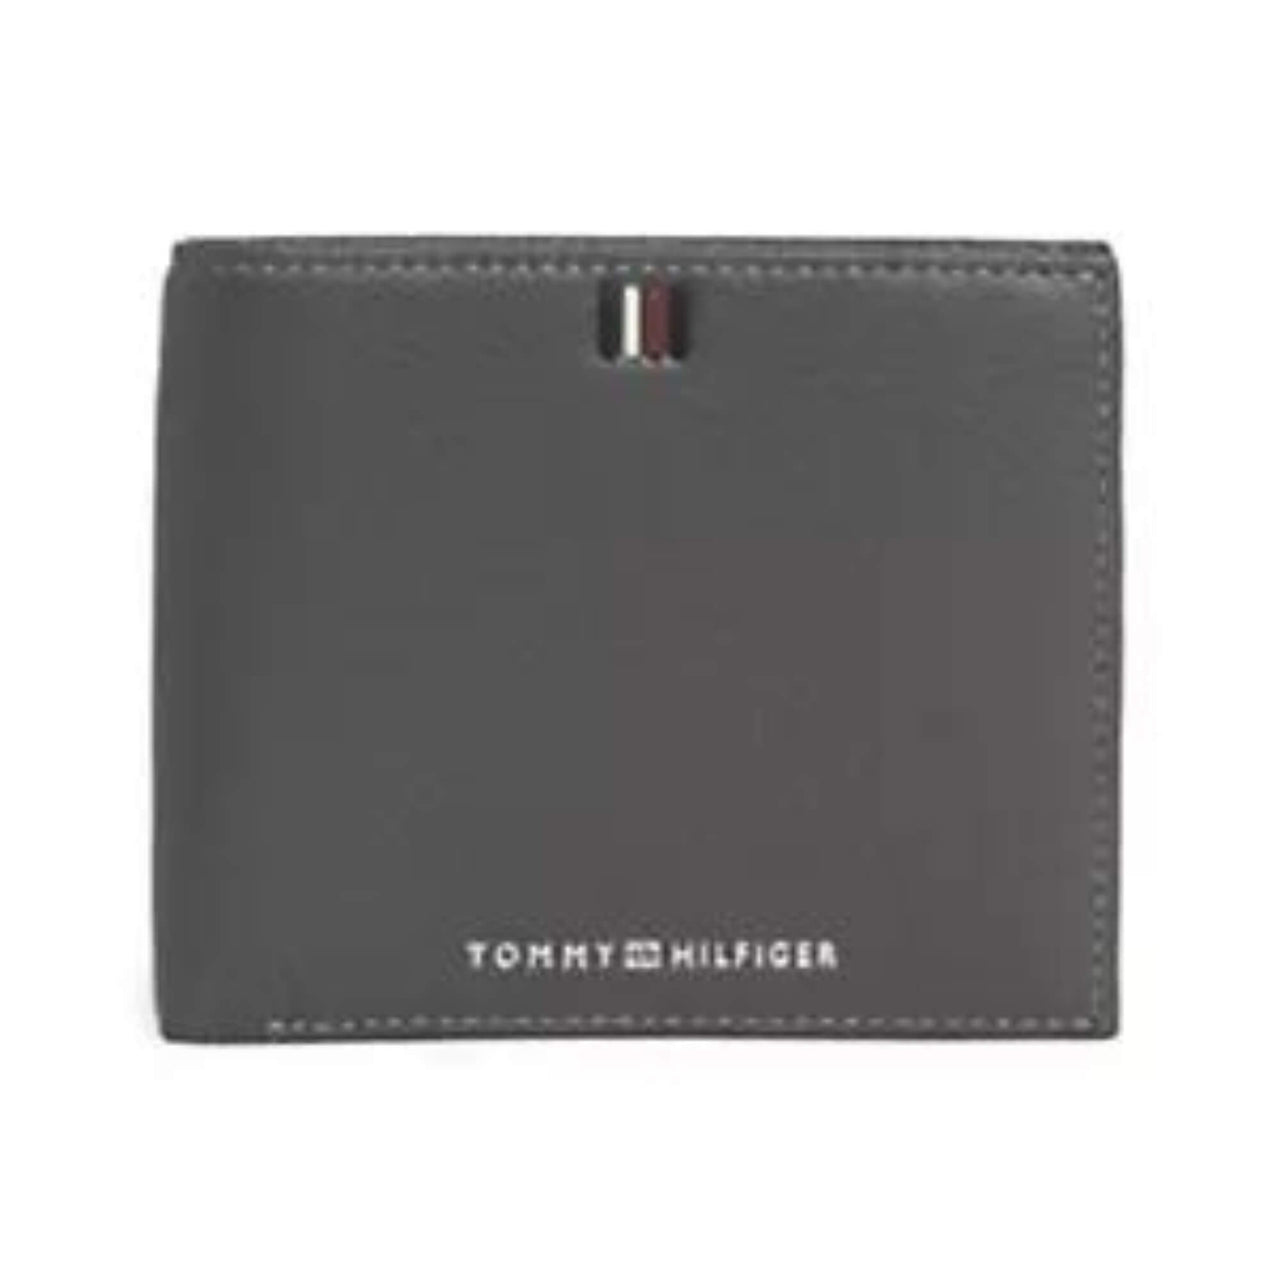 Carteras Tommy Hilfiger Hombre H Central Cc And Coin